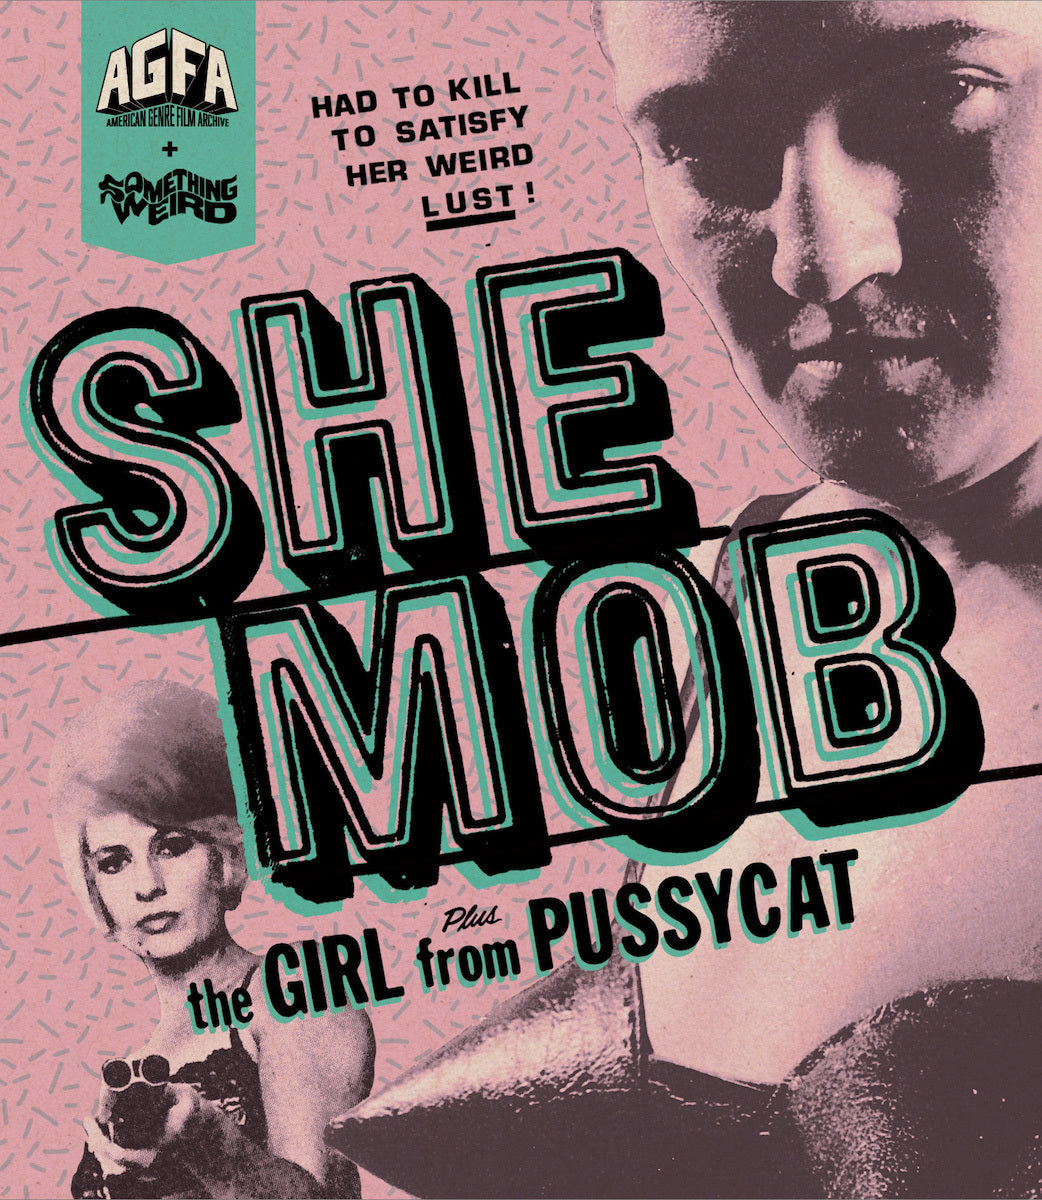 She Mob / The Girl From Pussycat Blu-Ray Blu-Ray